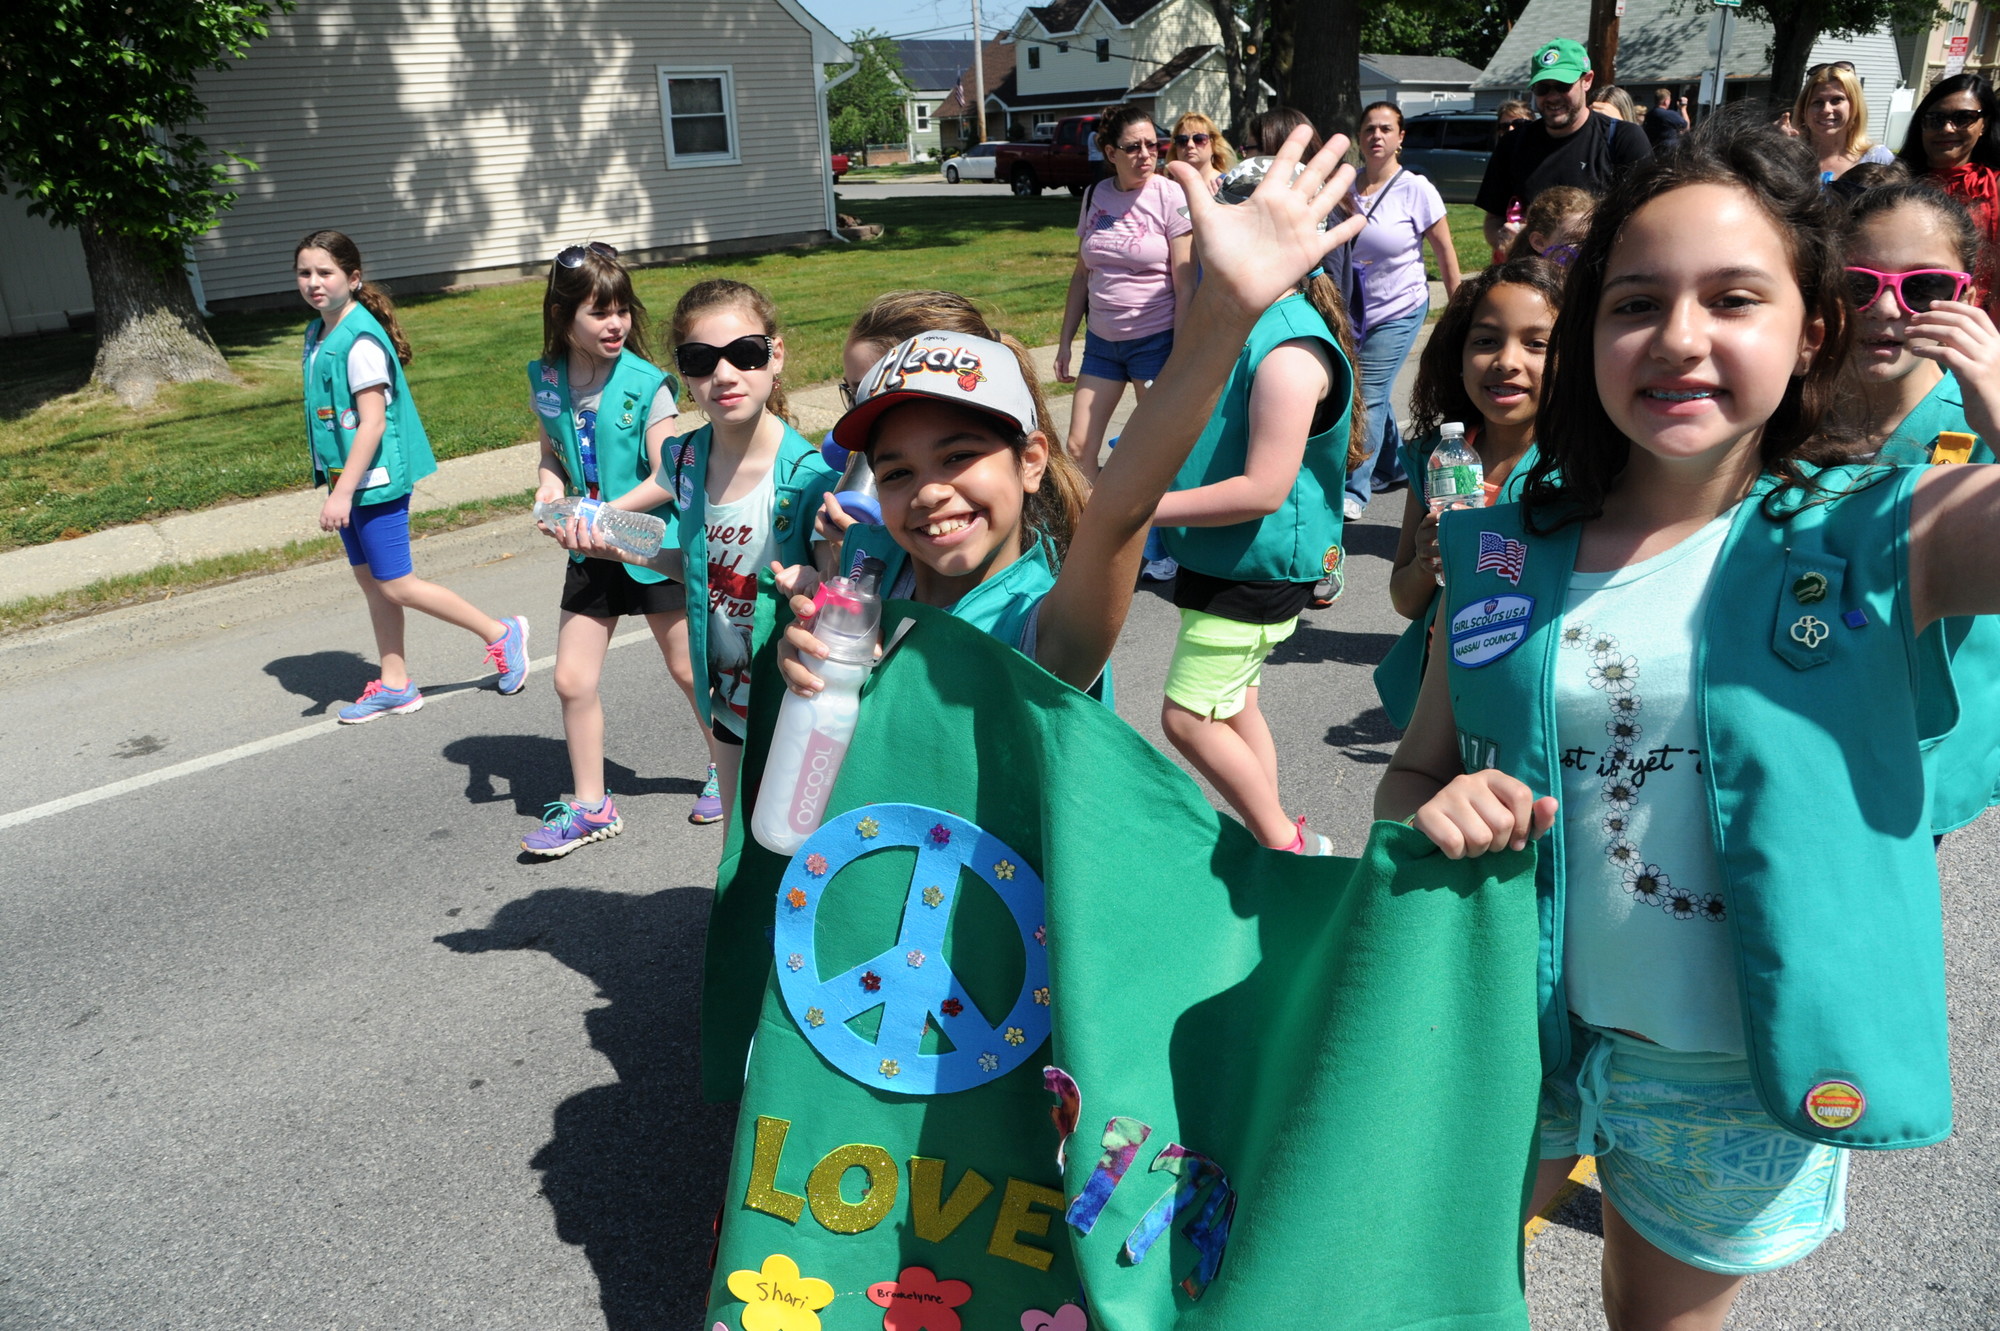 Dozens of local Girl Scout troops took part in the parade procession.